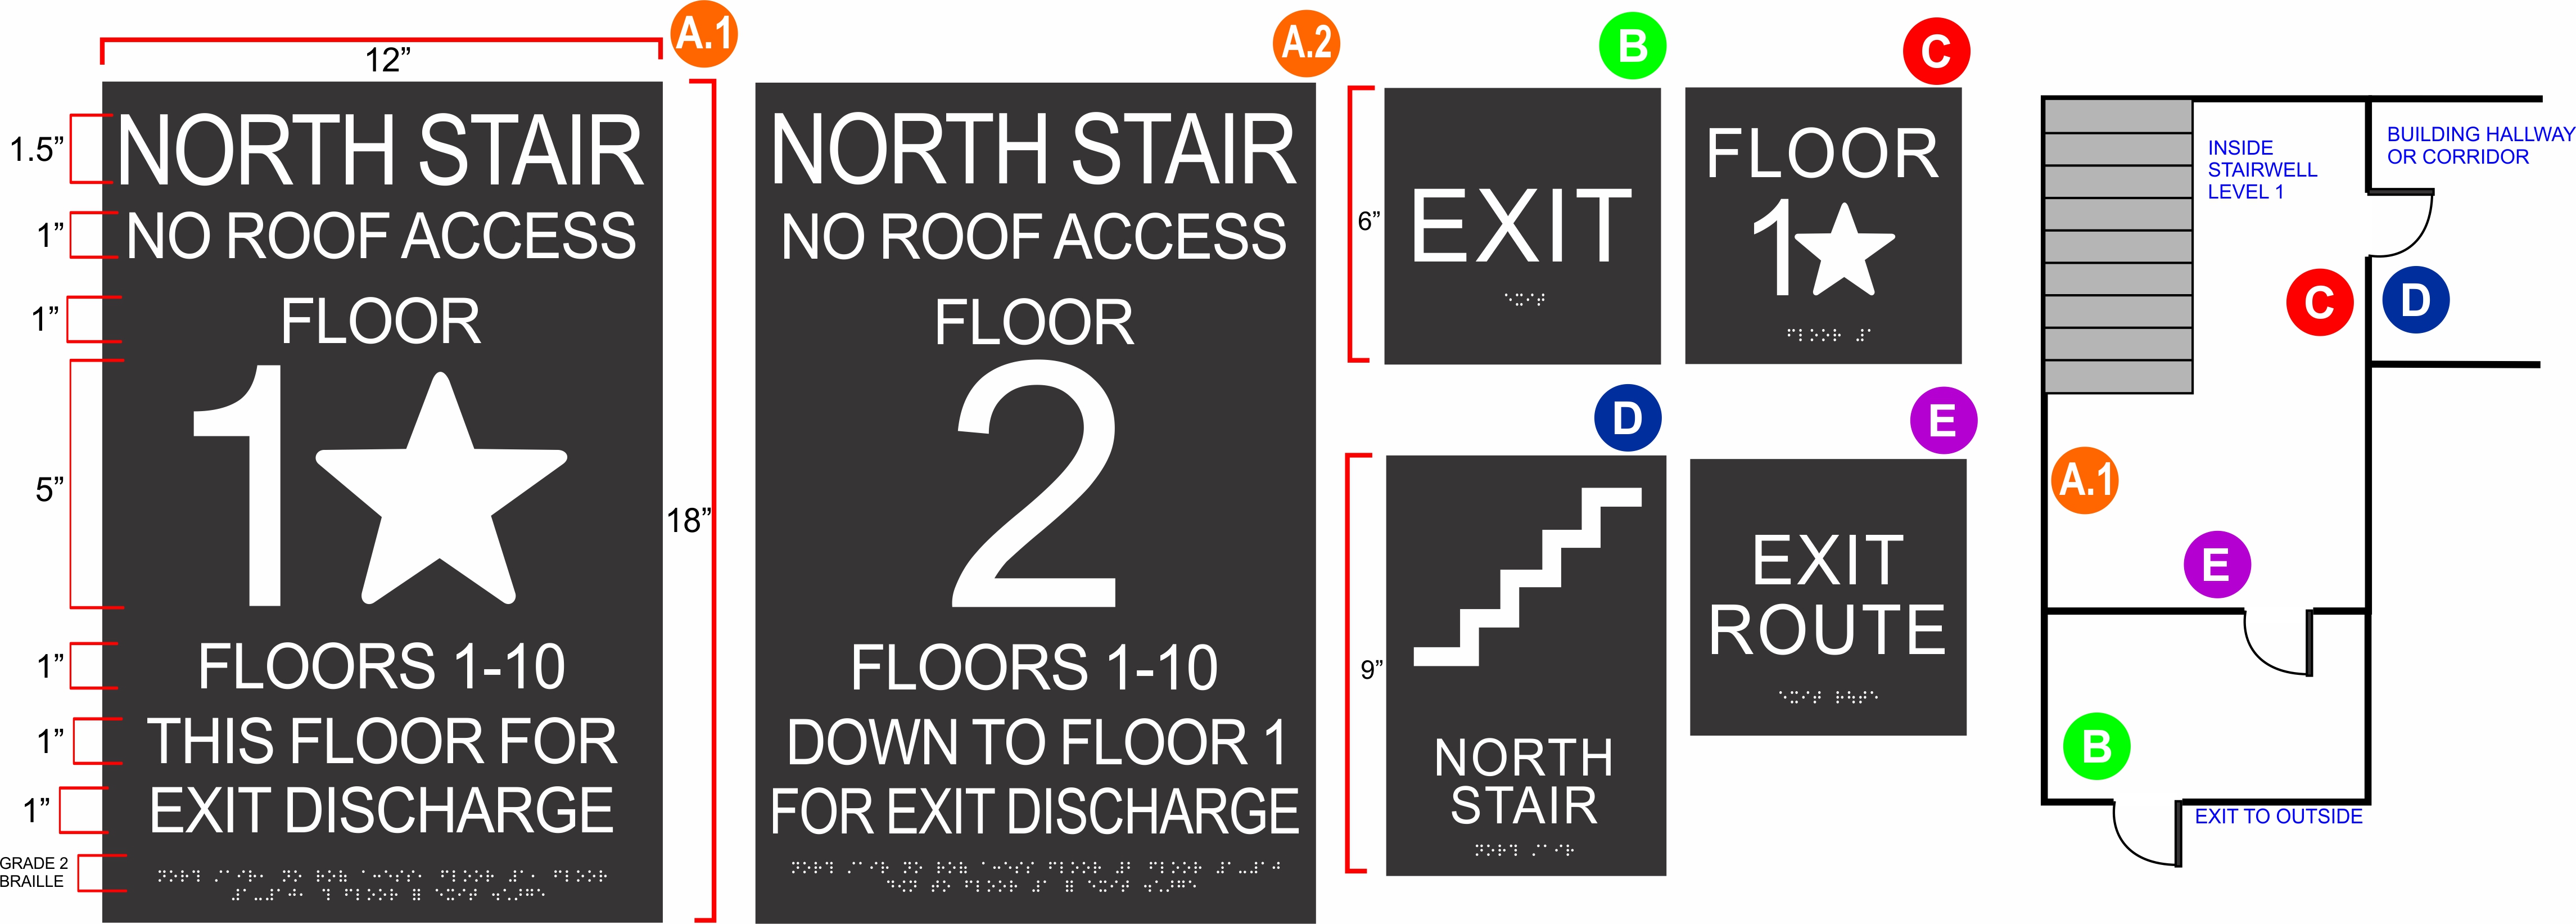 Stairwell ID Signs